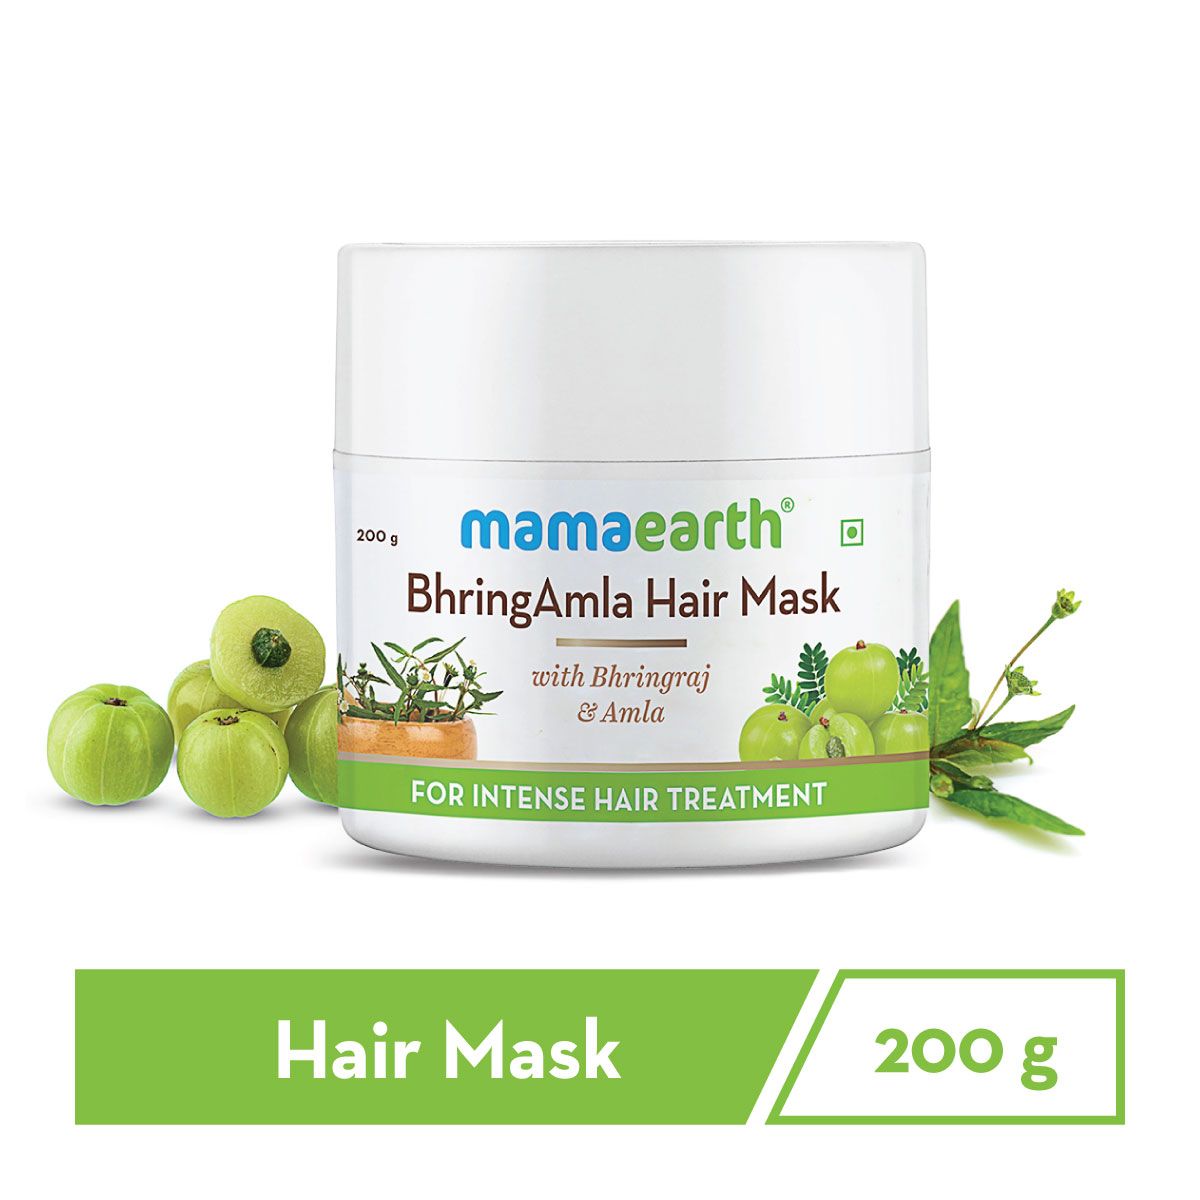 Prevents Hair Fall with bhringamla hair mask